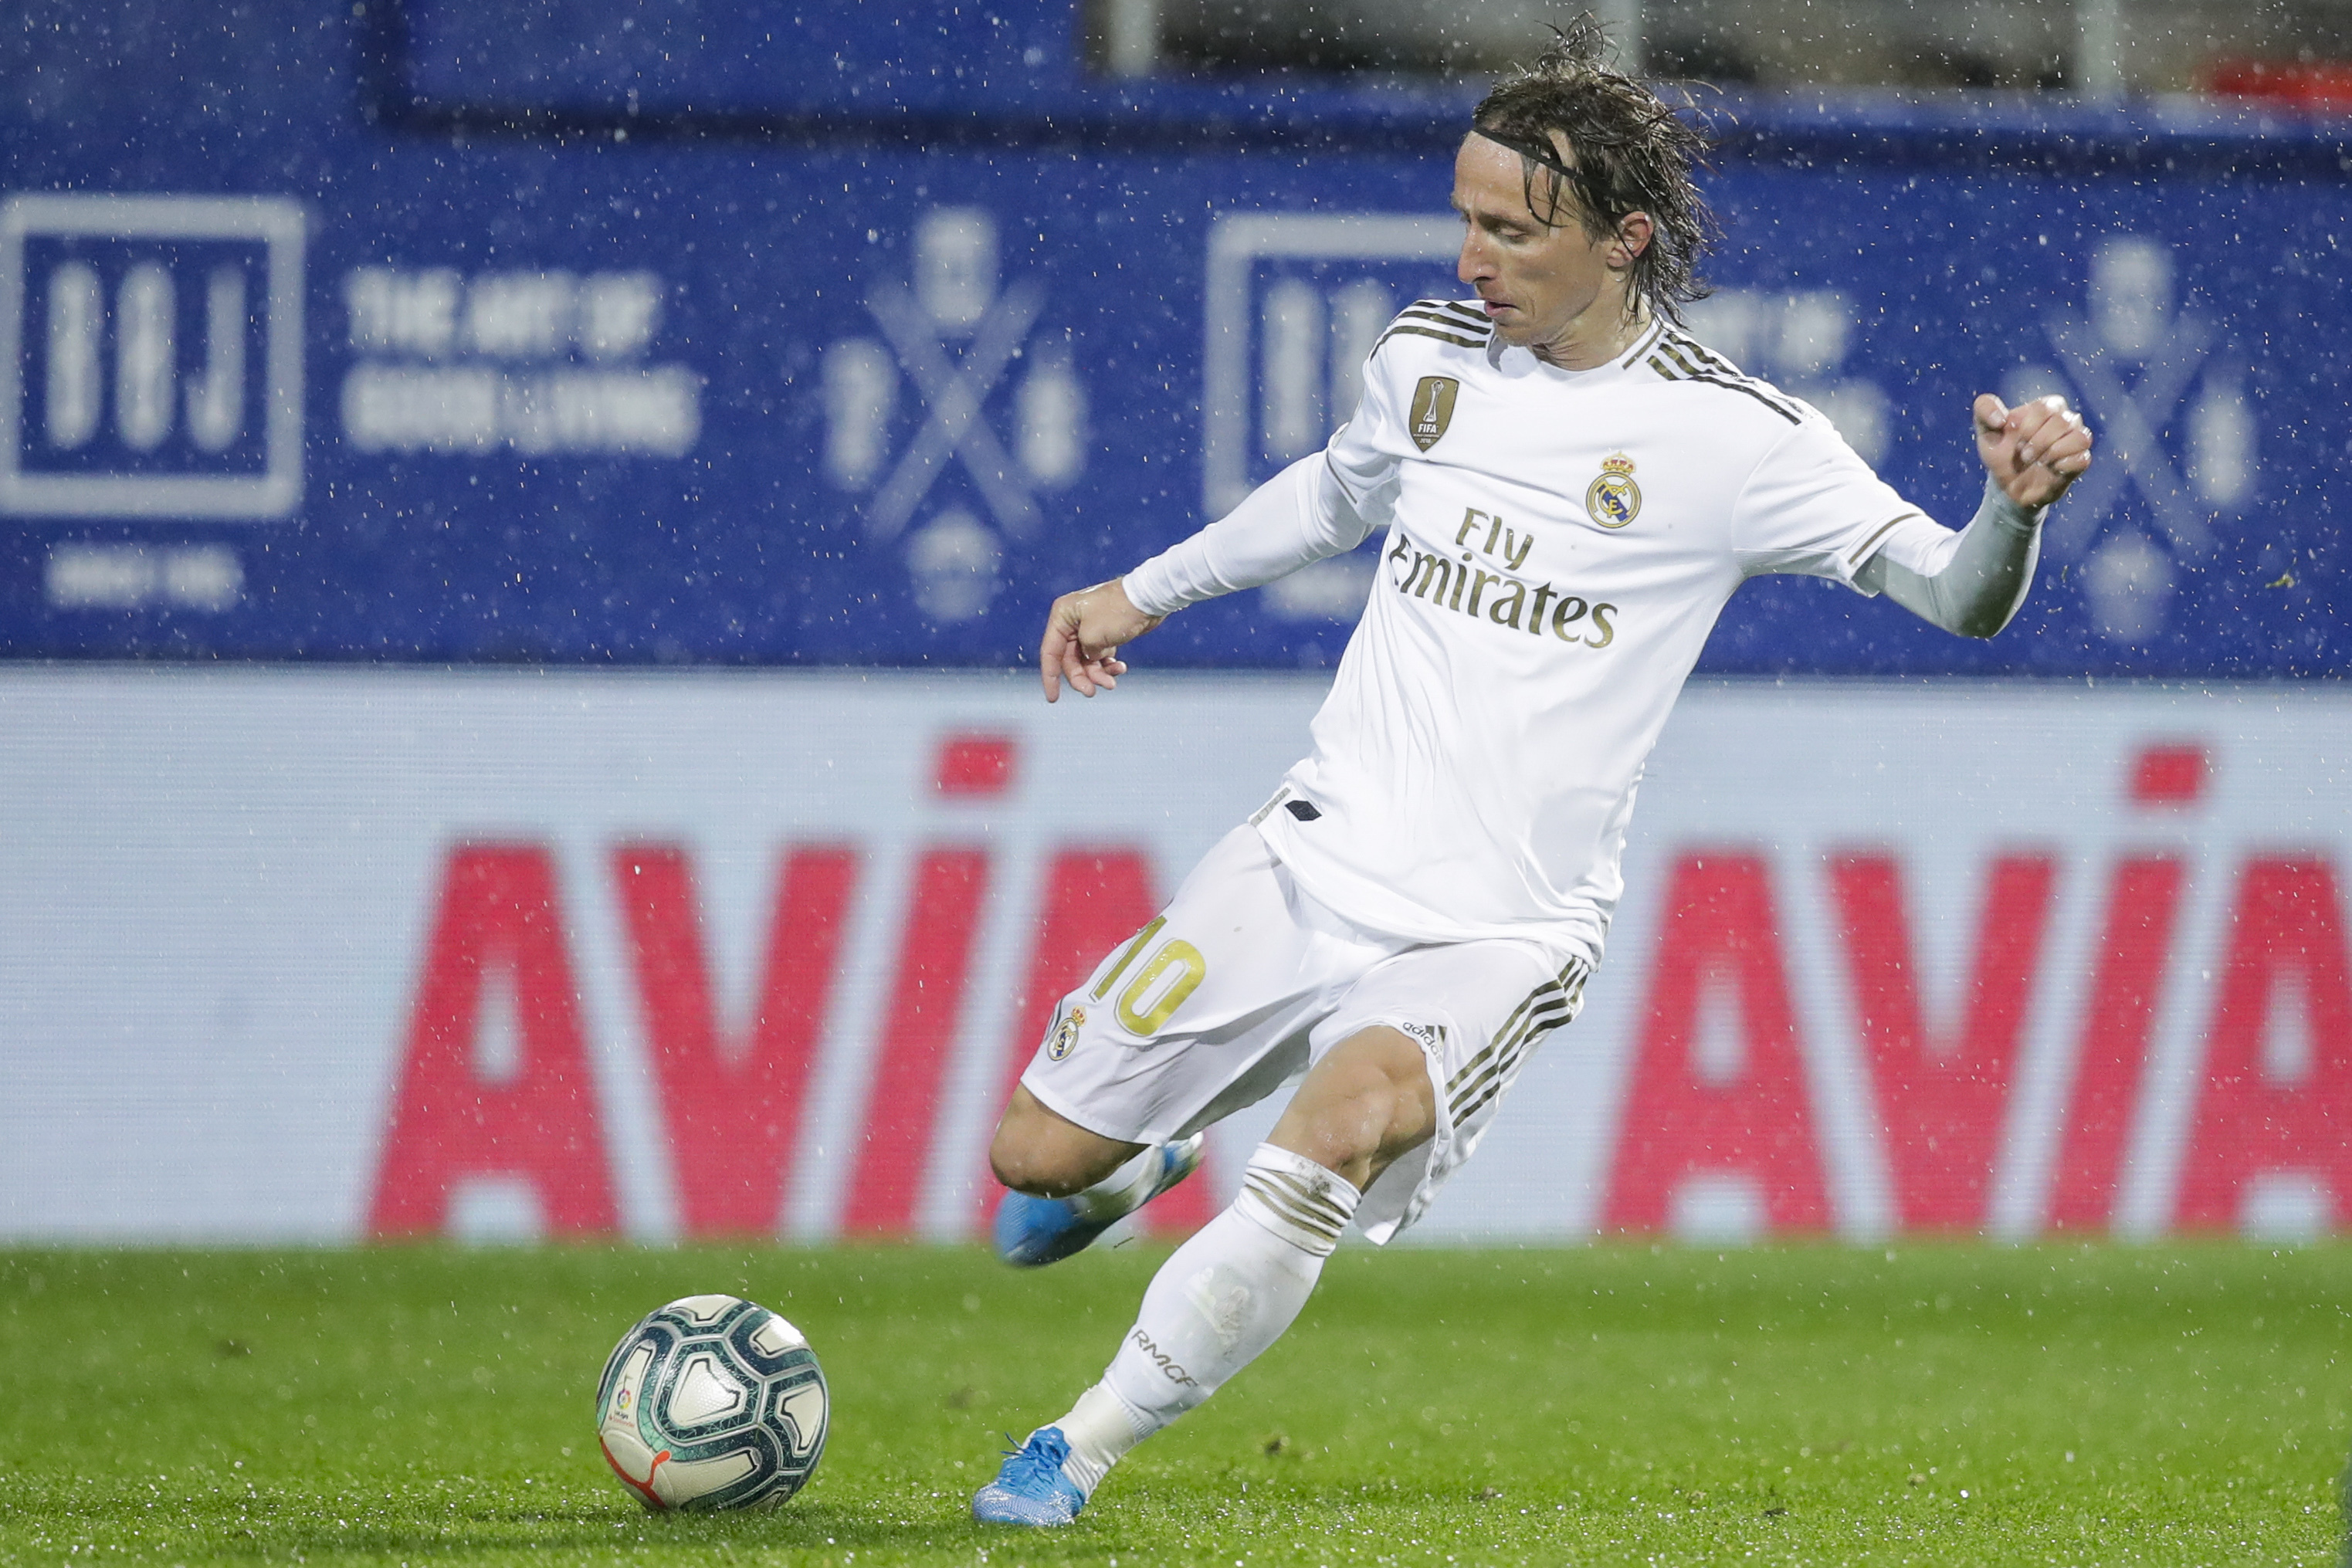 Luka Modric's heavenly first touch for Real Madrid was enough to